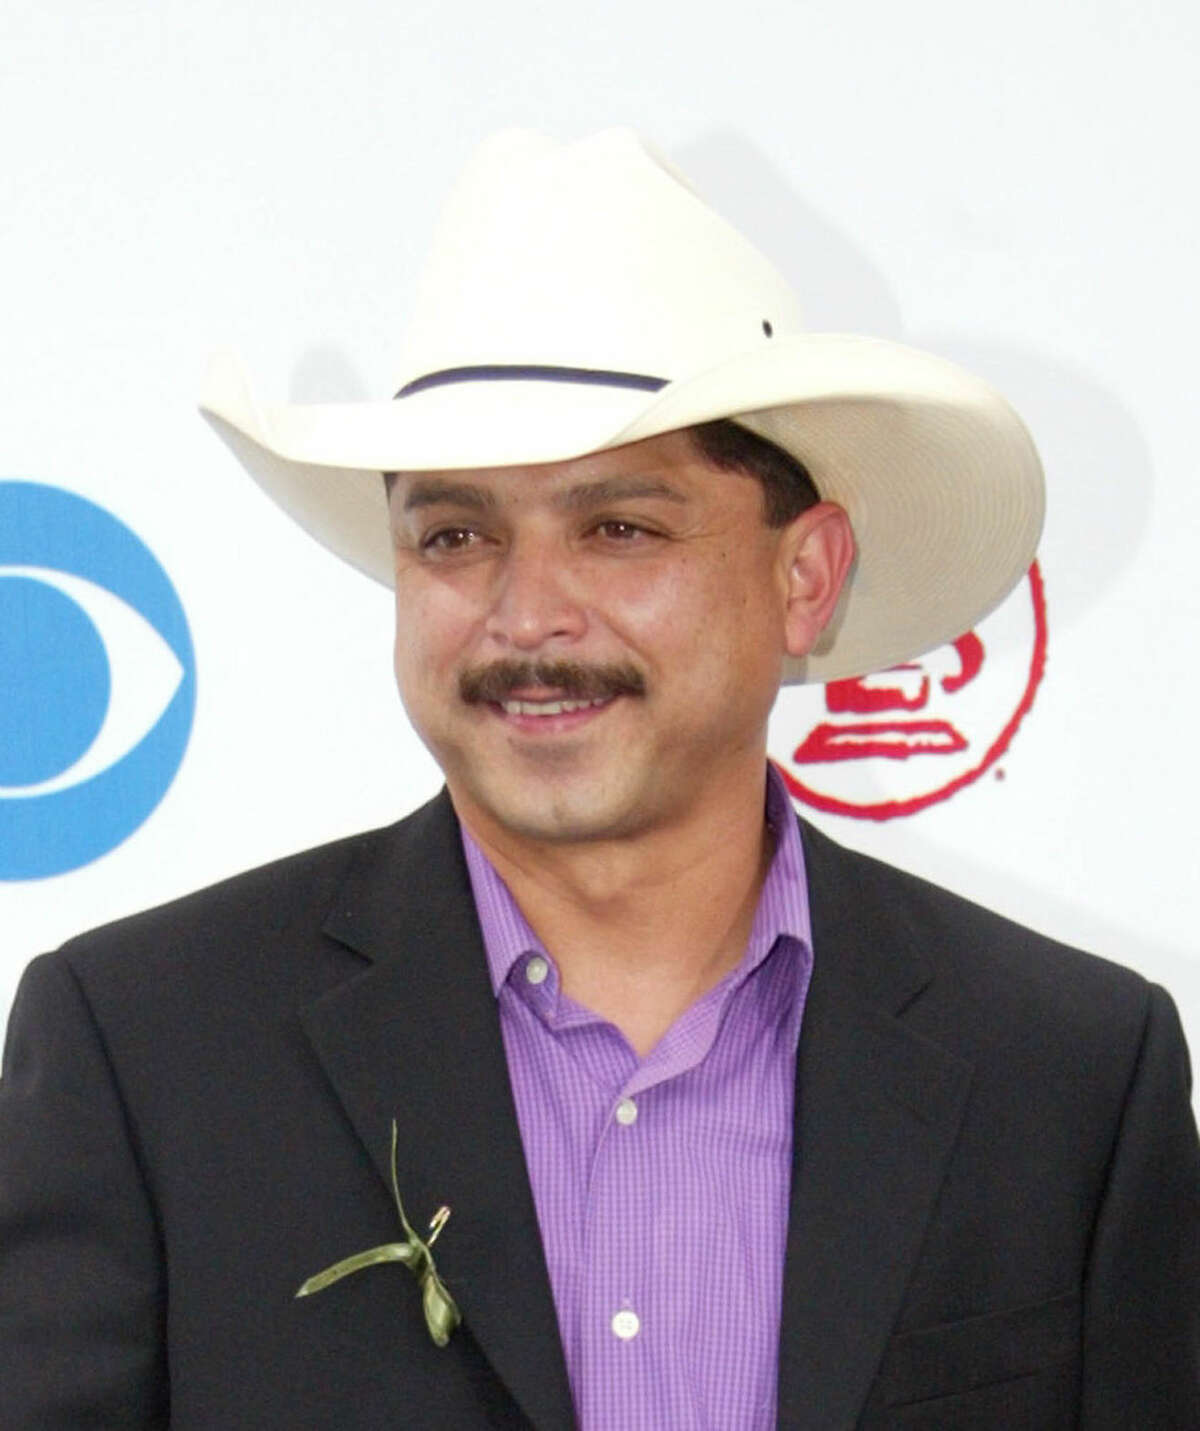 In this Sept. 3, 2003 file photo, Emilio Navaira arrives at the Latin Grammy Awards in Miami. The Grammy-winning Tejano star has died in New Braunfels, Texas. He was 53. Police in New Braunfels said in a statement Tuesday, May 17, 2016, that preliminary results indicate the entertainer died of natural causes. (AP Photo/Wilfredo Lee, file)